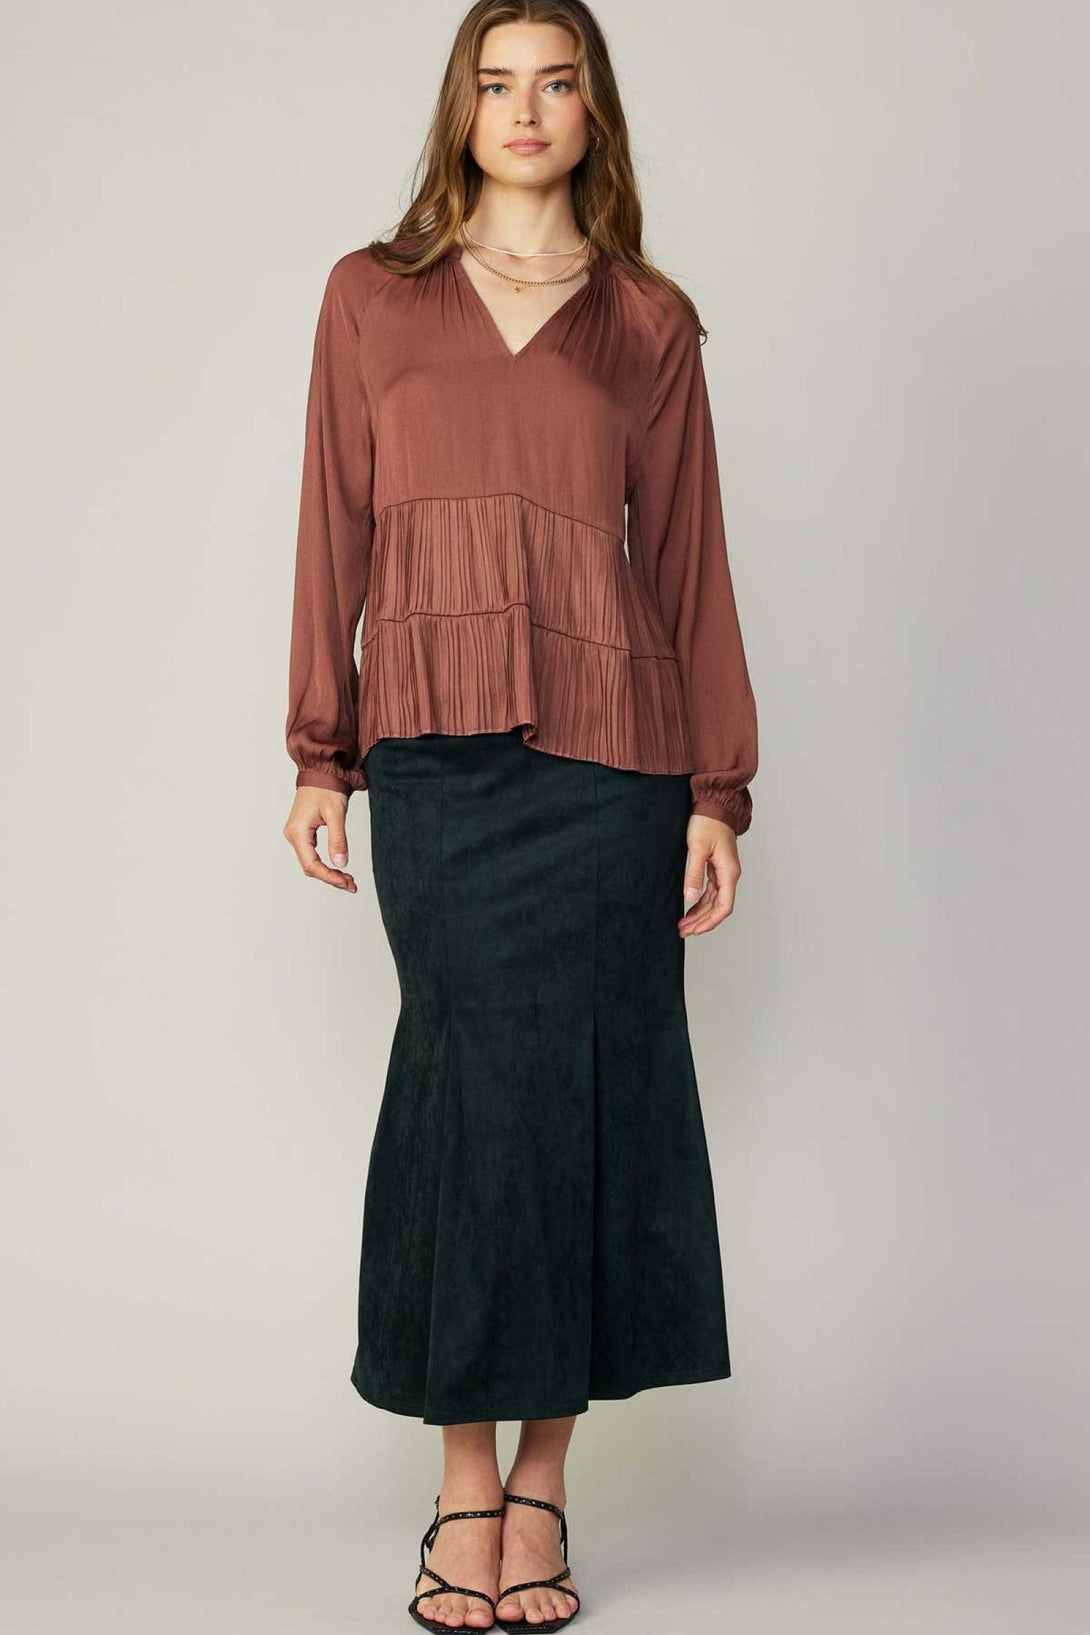 Current Air Tiered Bottom Long Sleeve Top With Split Neck